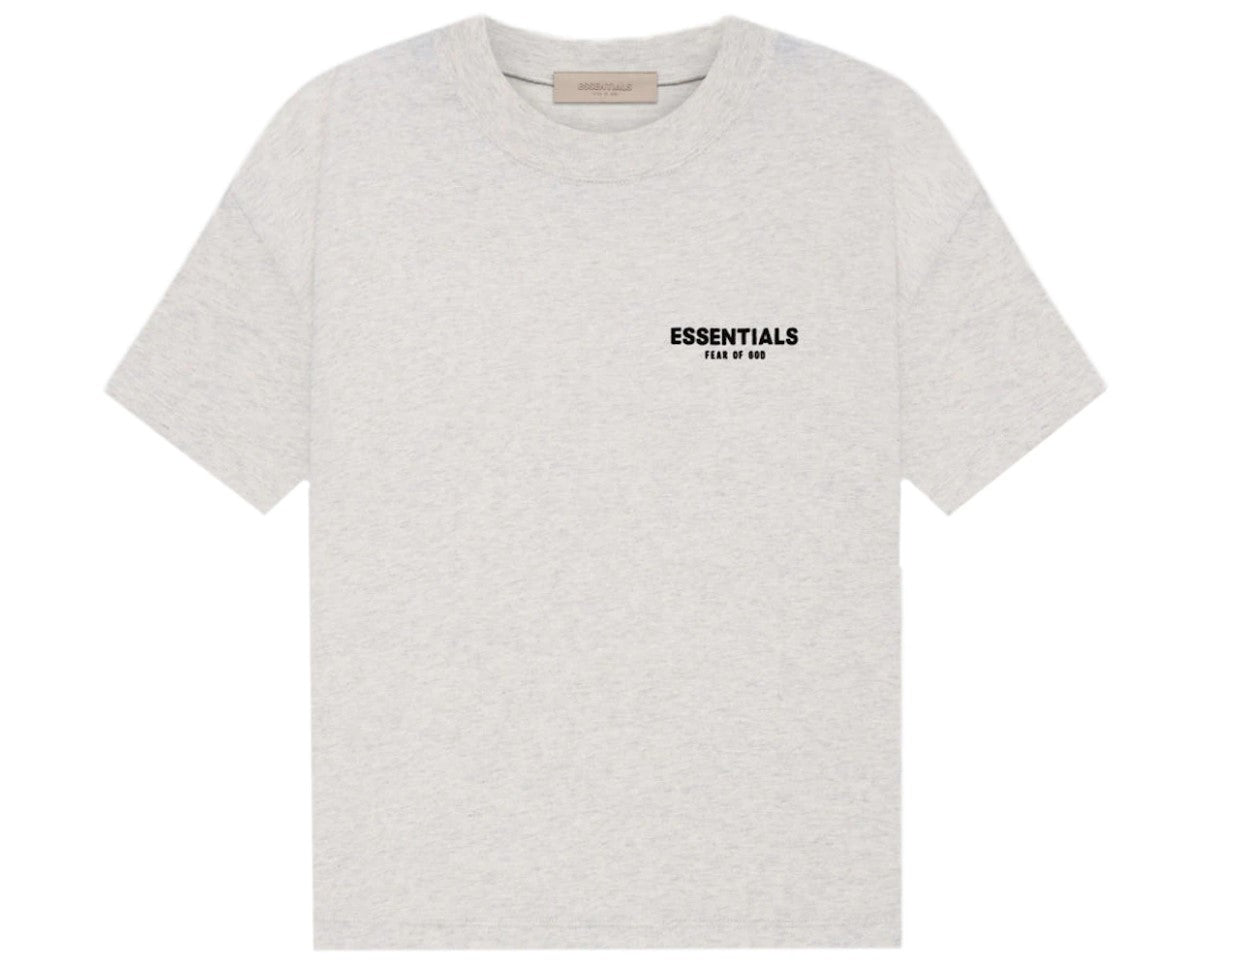 ESSENTIALS - Tee "Light Oatmeal" - THE GAME